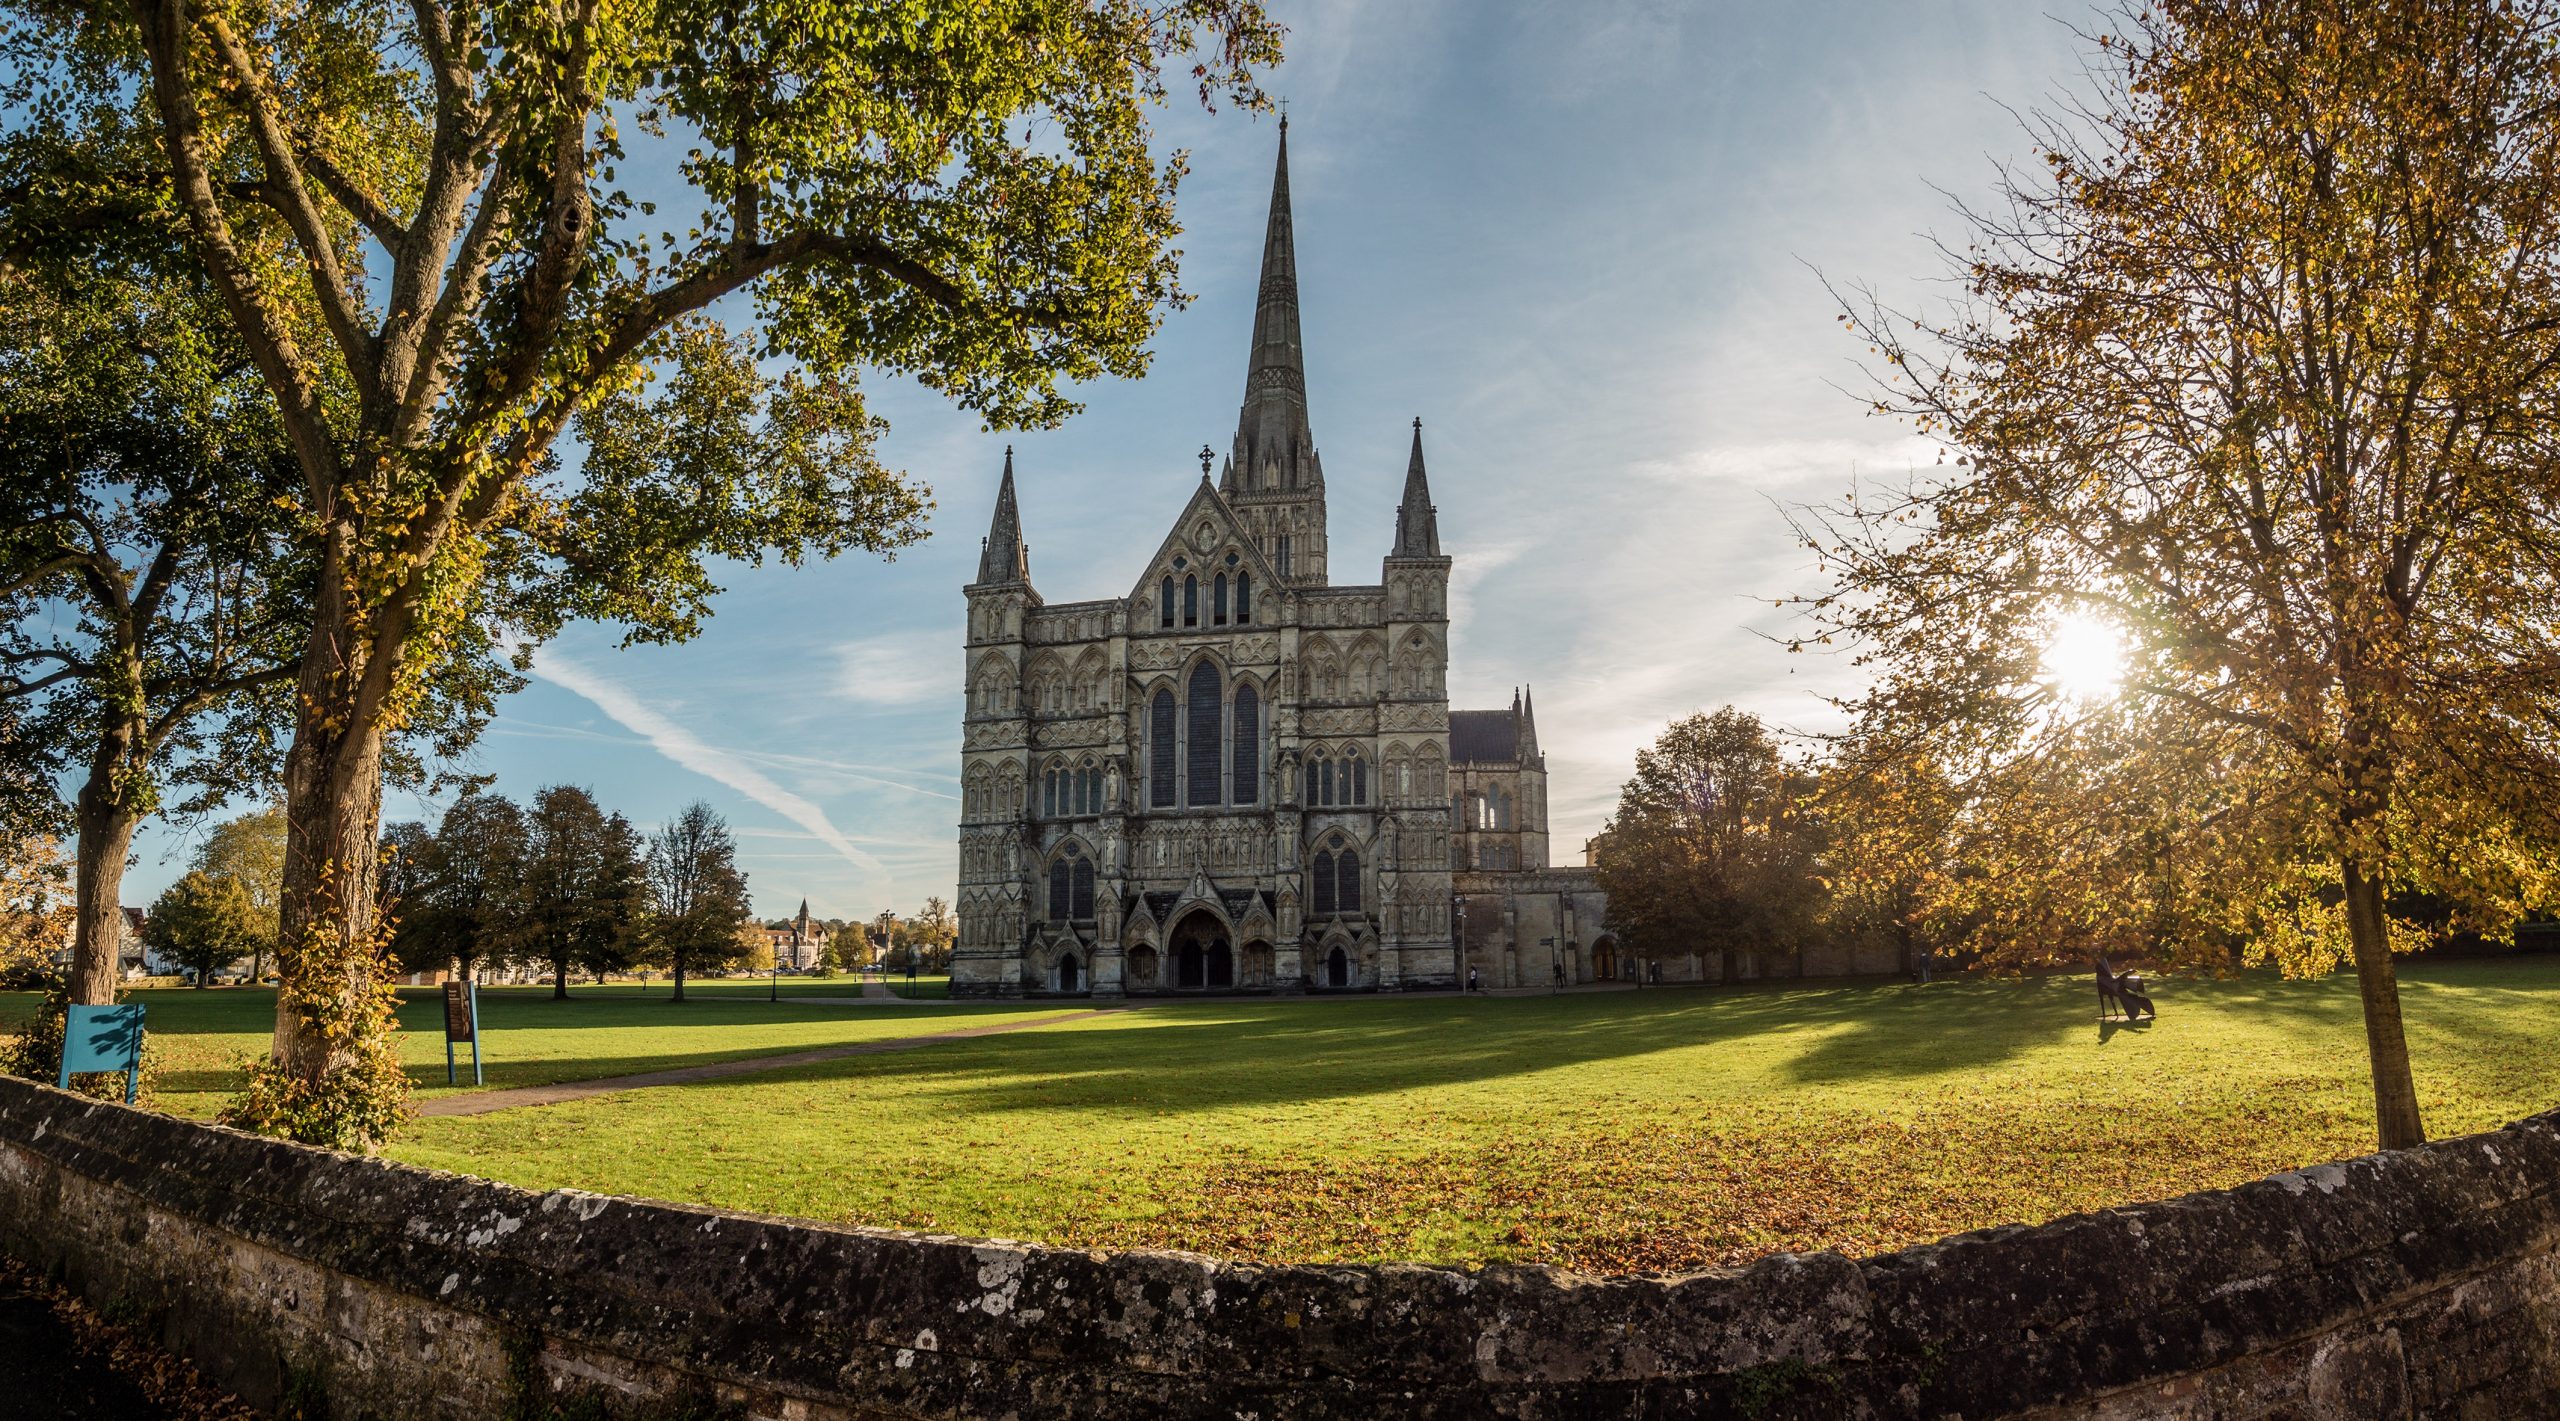 Salisbury Cathedral awarded a Visit England Attraction Accolade